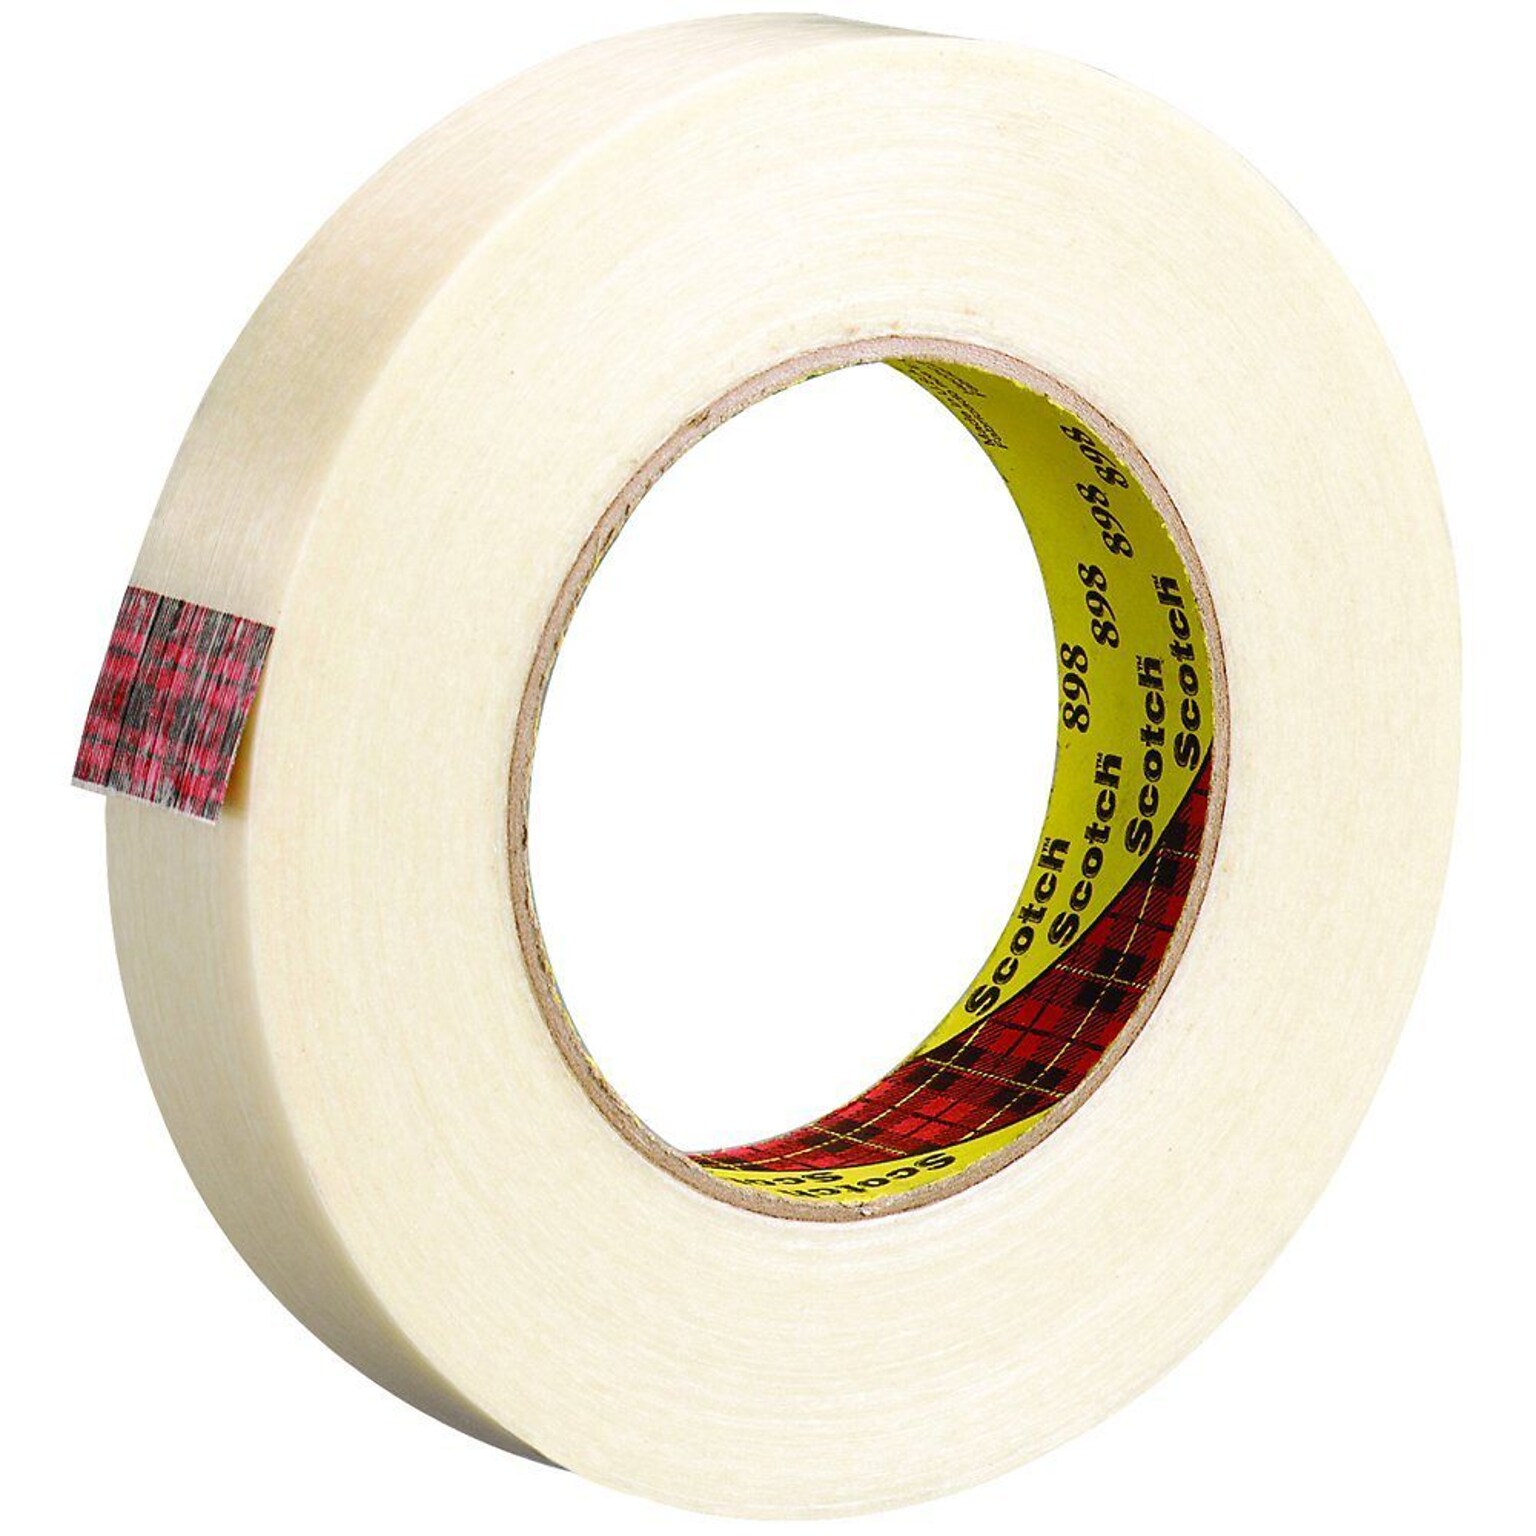 3M Strapping Tape, 6.6 Mil, 1 x 60 yds., Clear, 6/Case (T9158986PK)